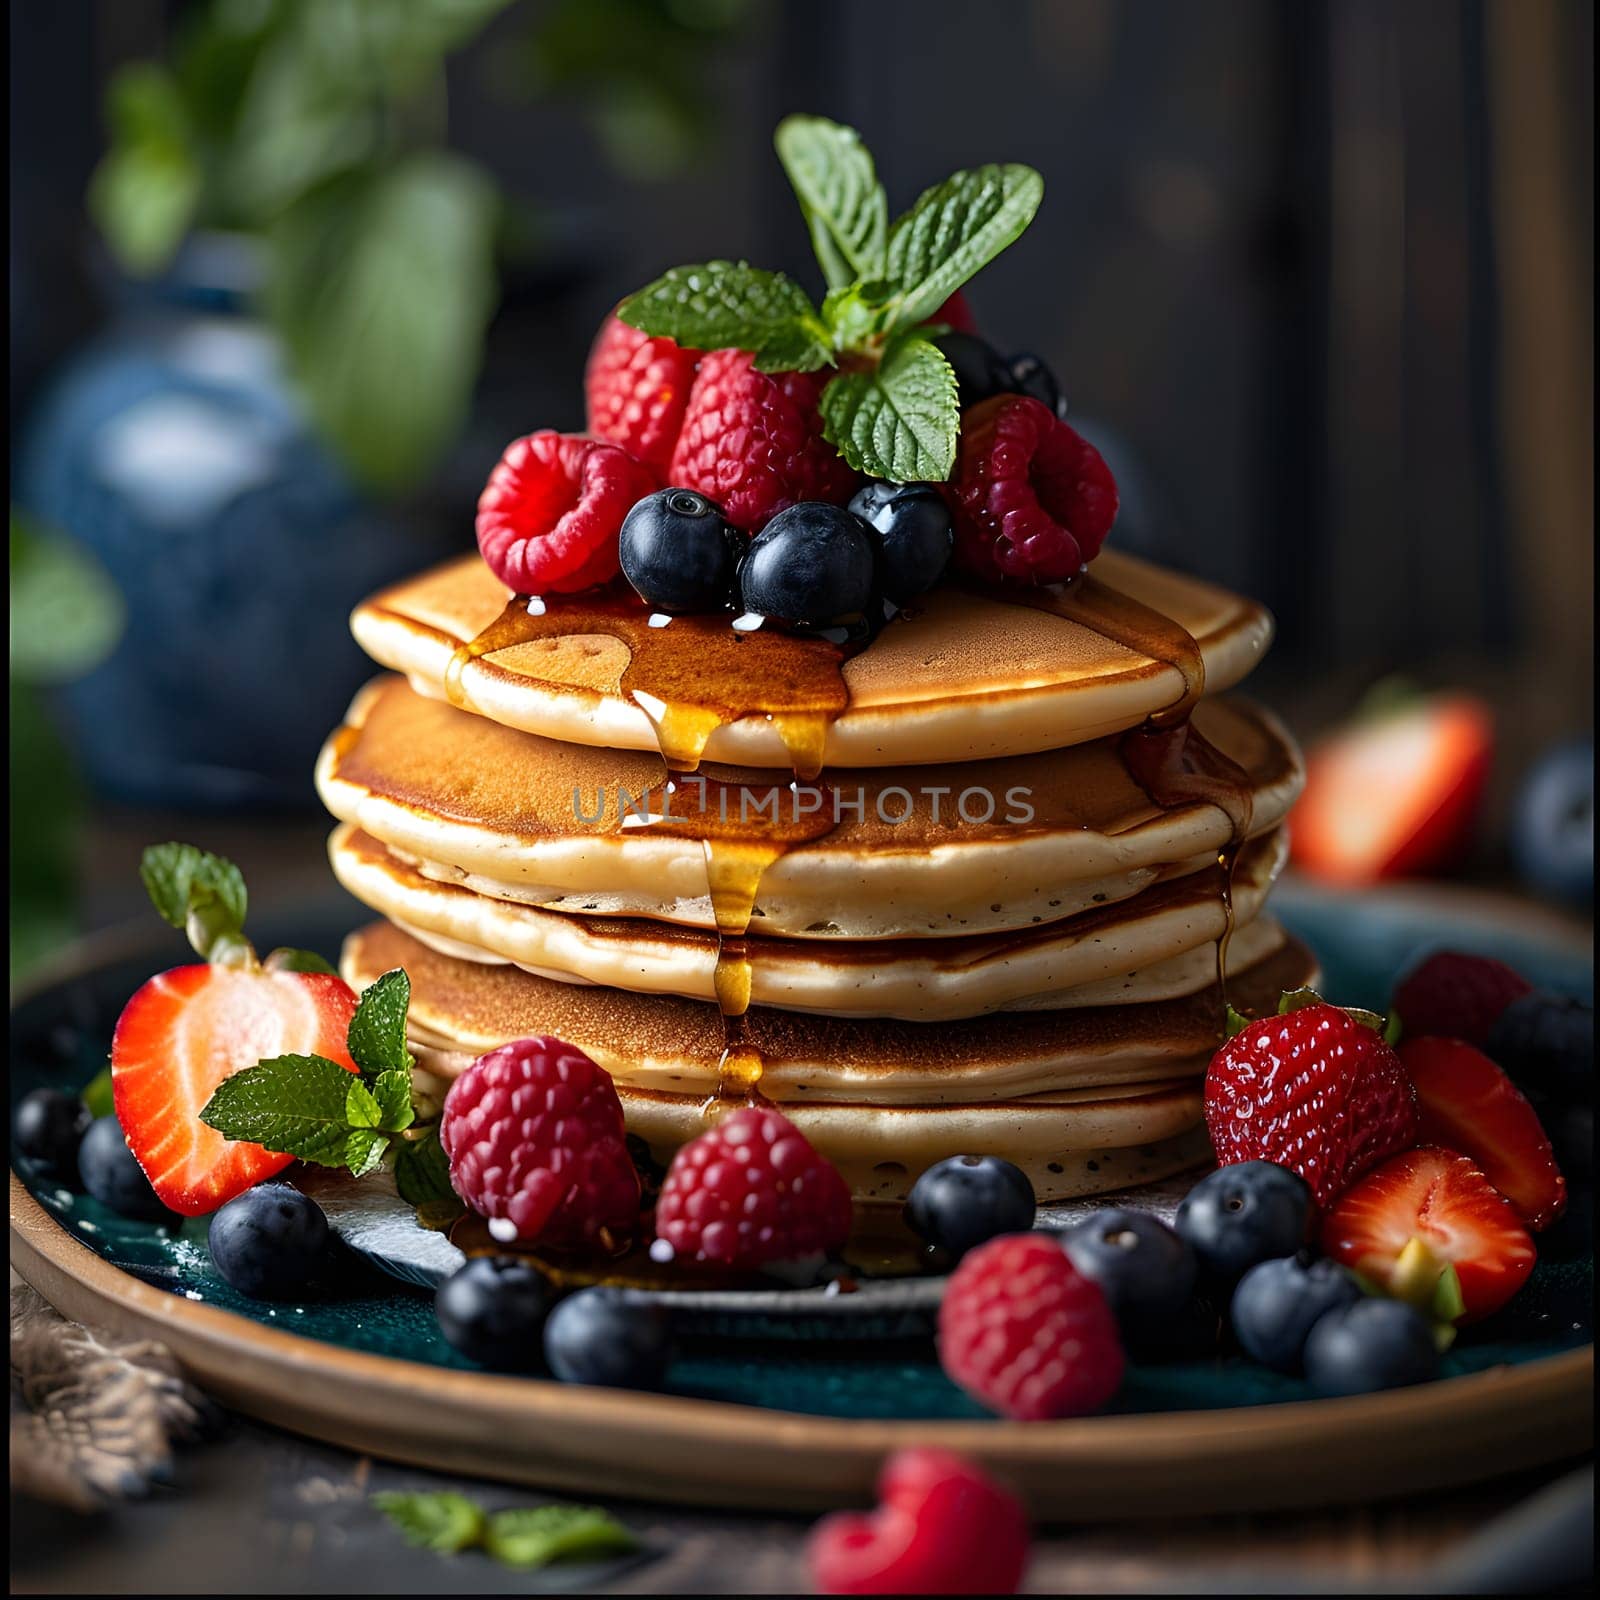 A delicious stack of pancakes topped with berries and syrup by Nadtochiy